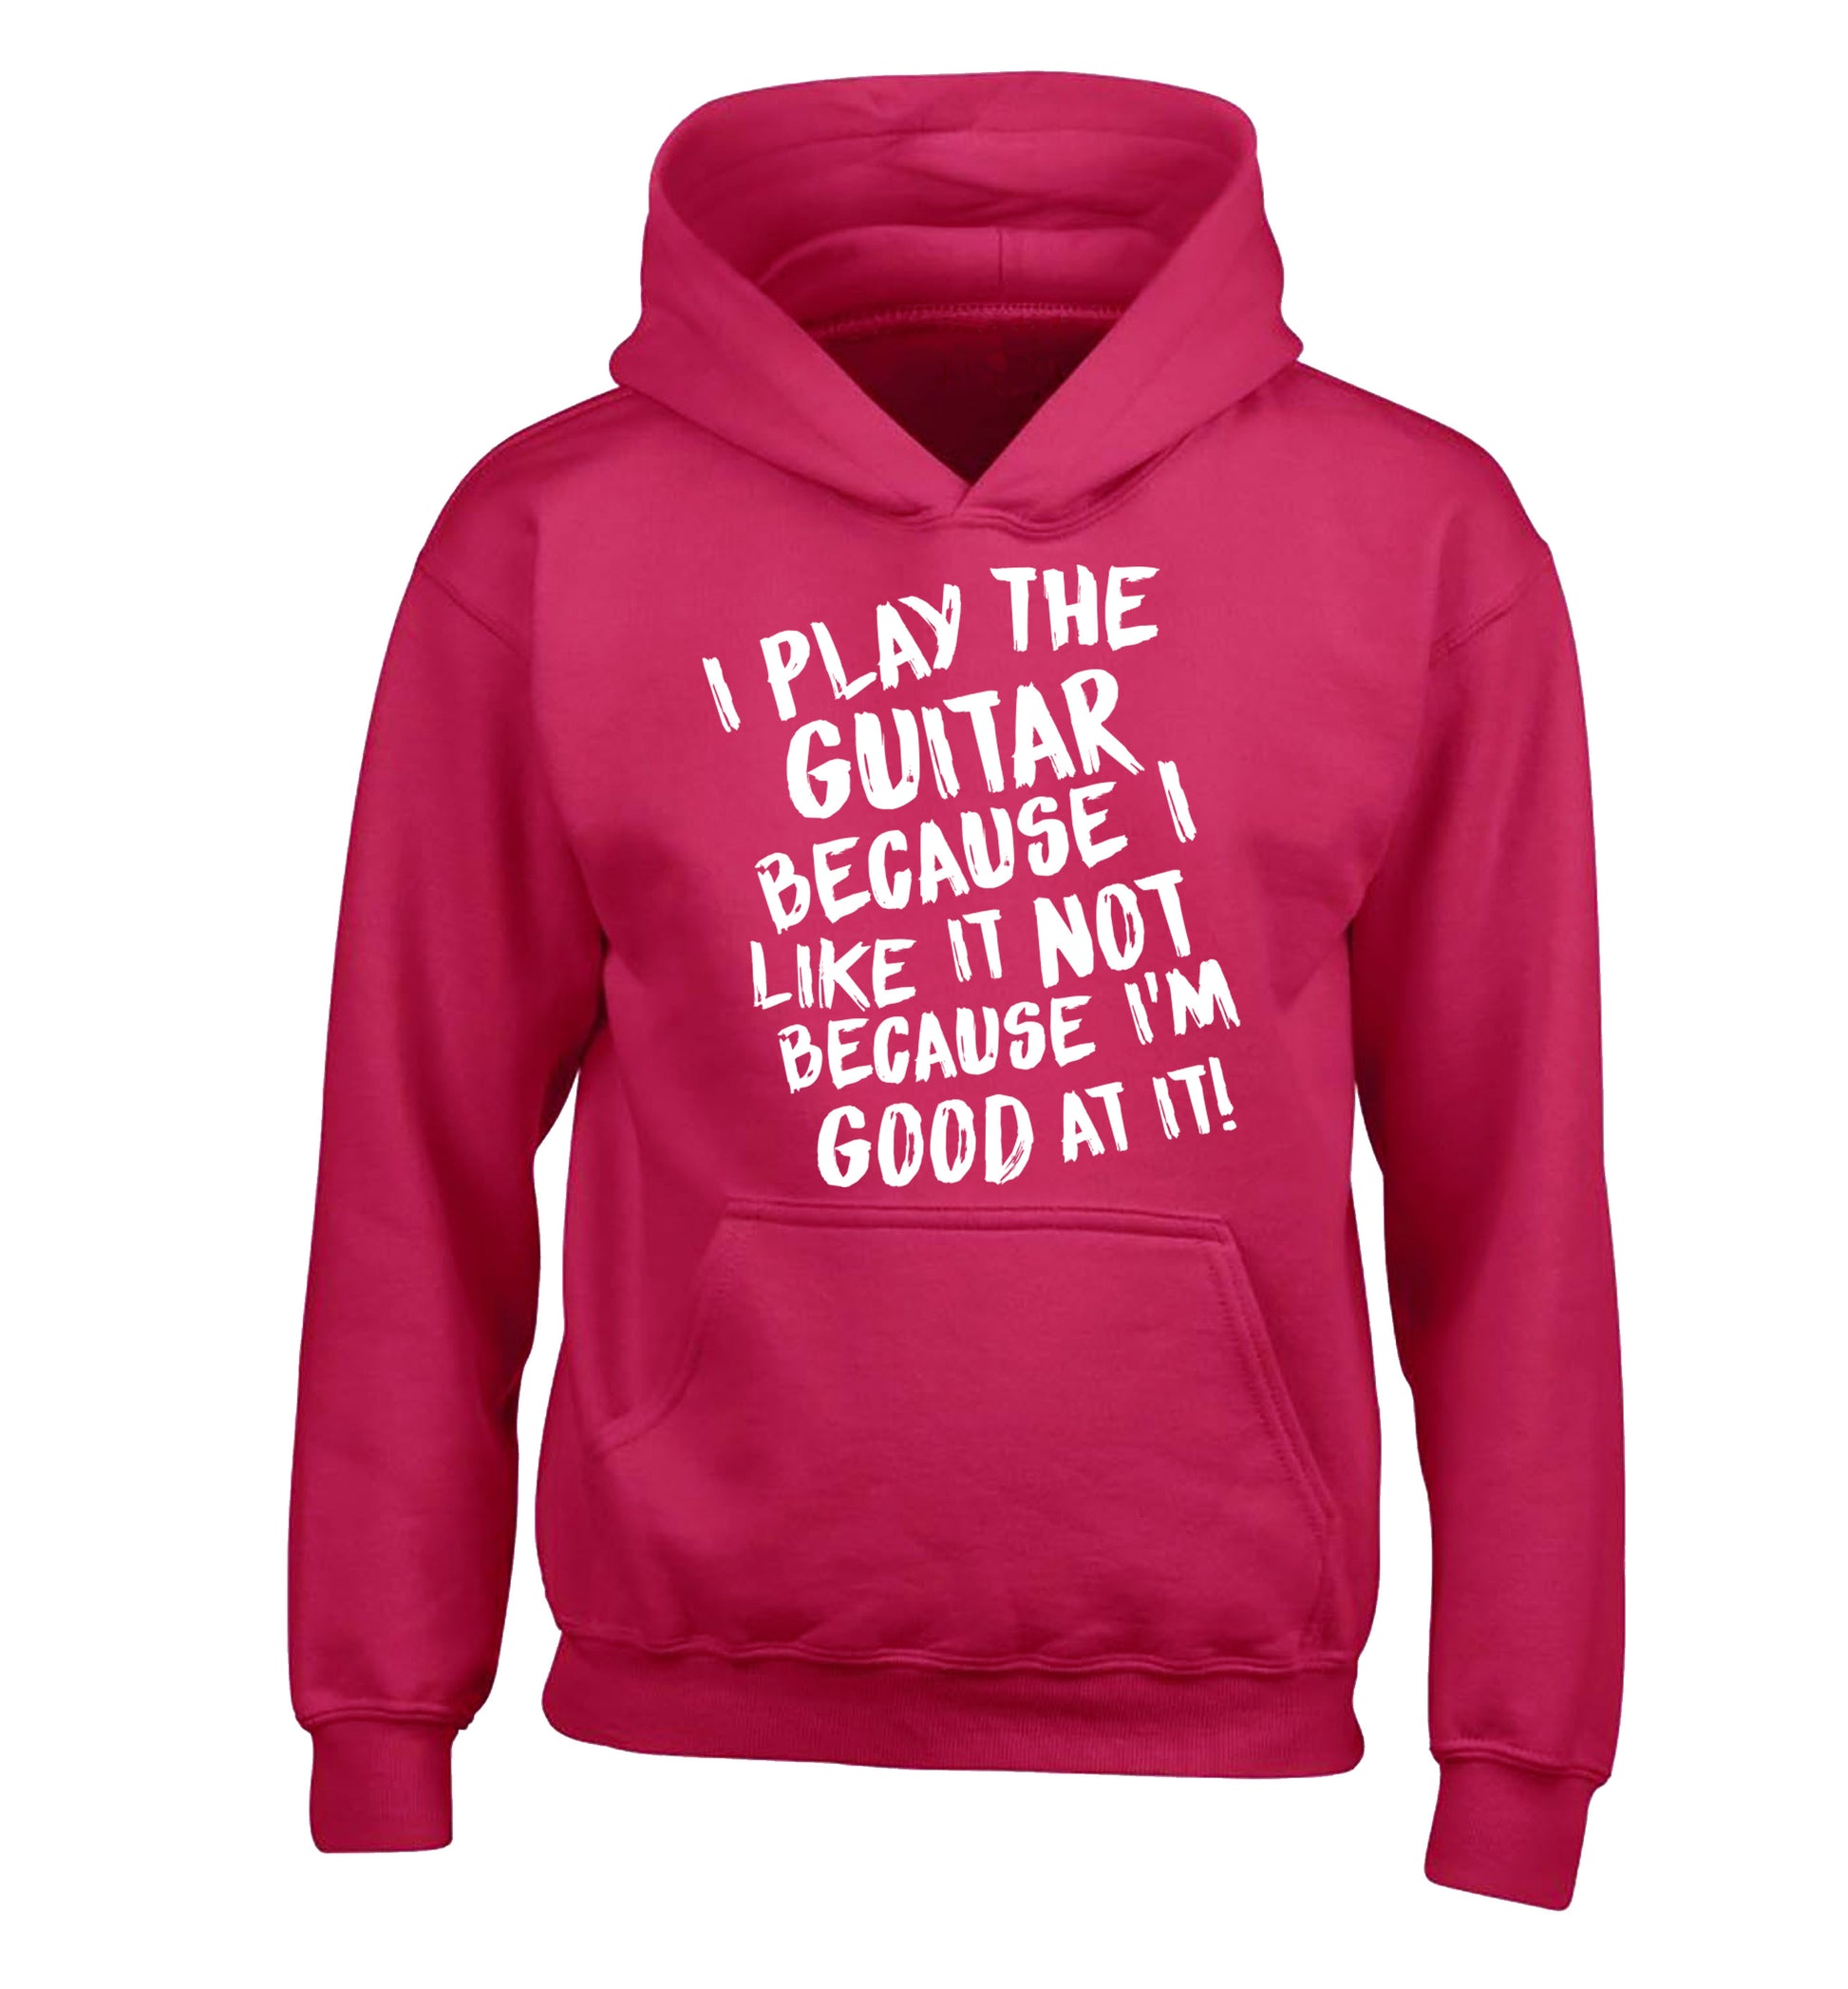 I play the guitar because I like it not because I'm good at it children's pink hoodie 12-14 Years